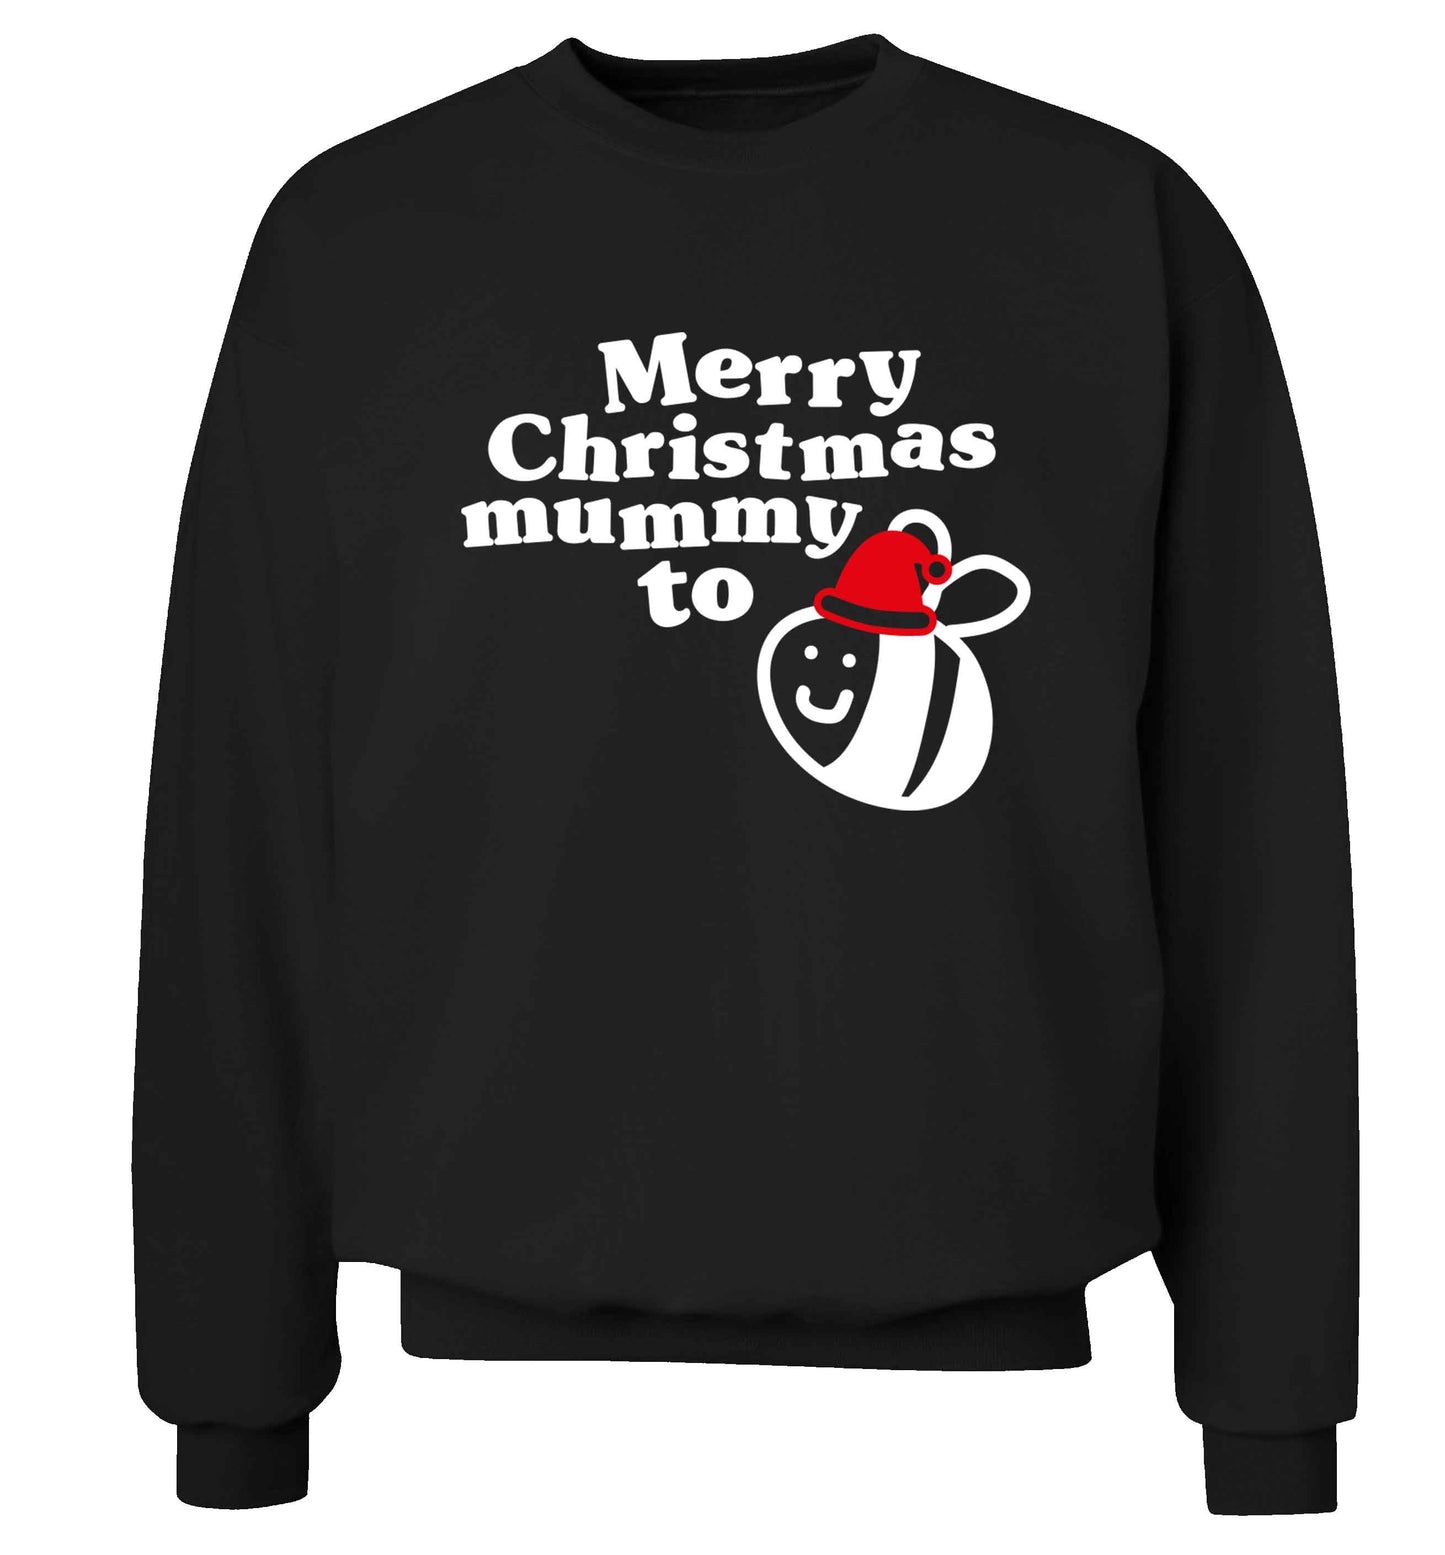 Merry Christmas mummy to be Adult's unisex black Sweater 2XL